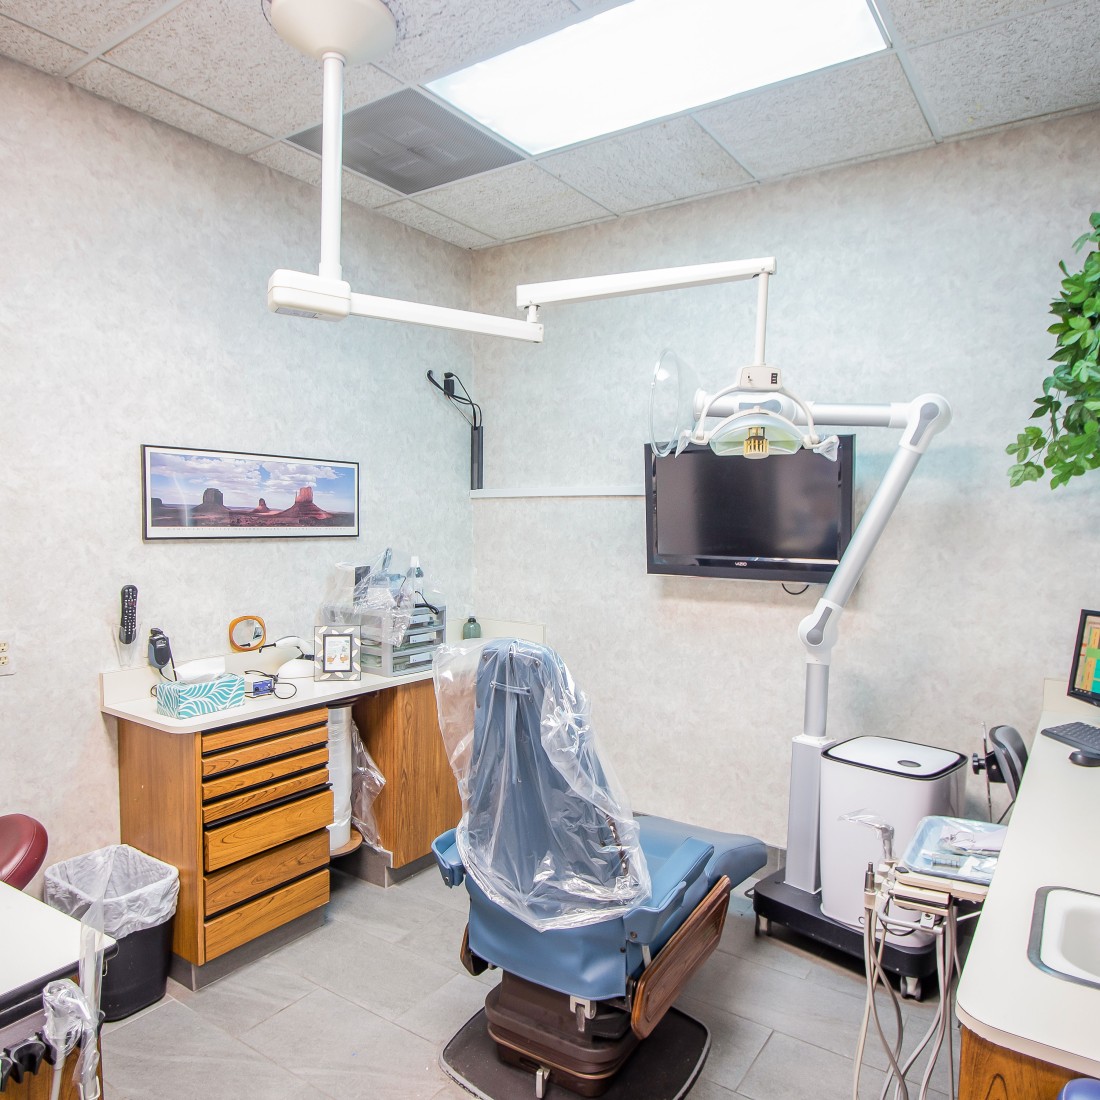 A patient room in a dentist's office